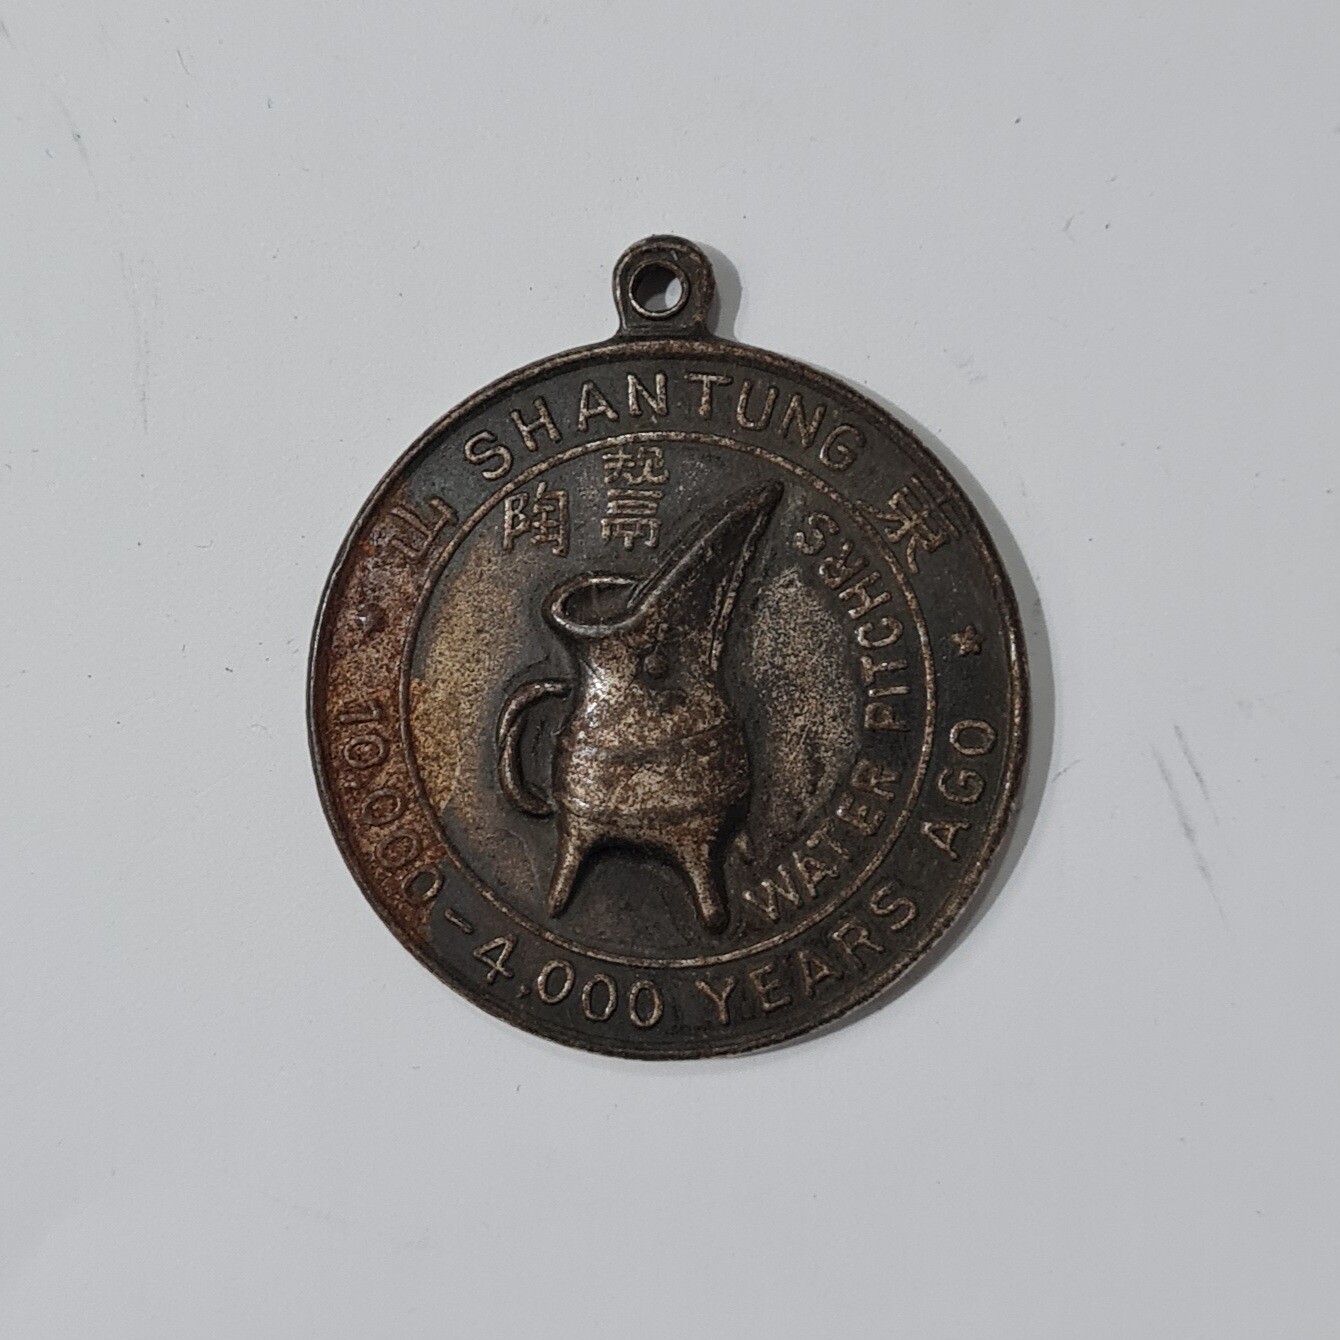 Chinese Medal